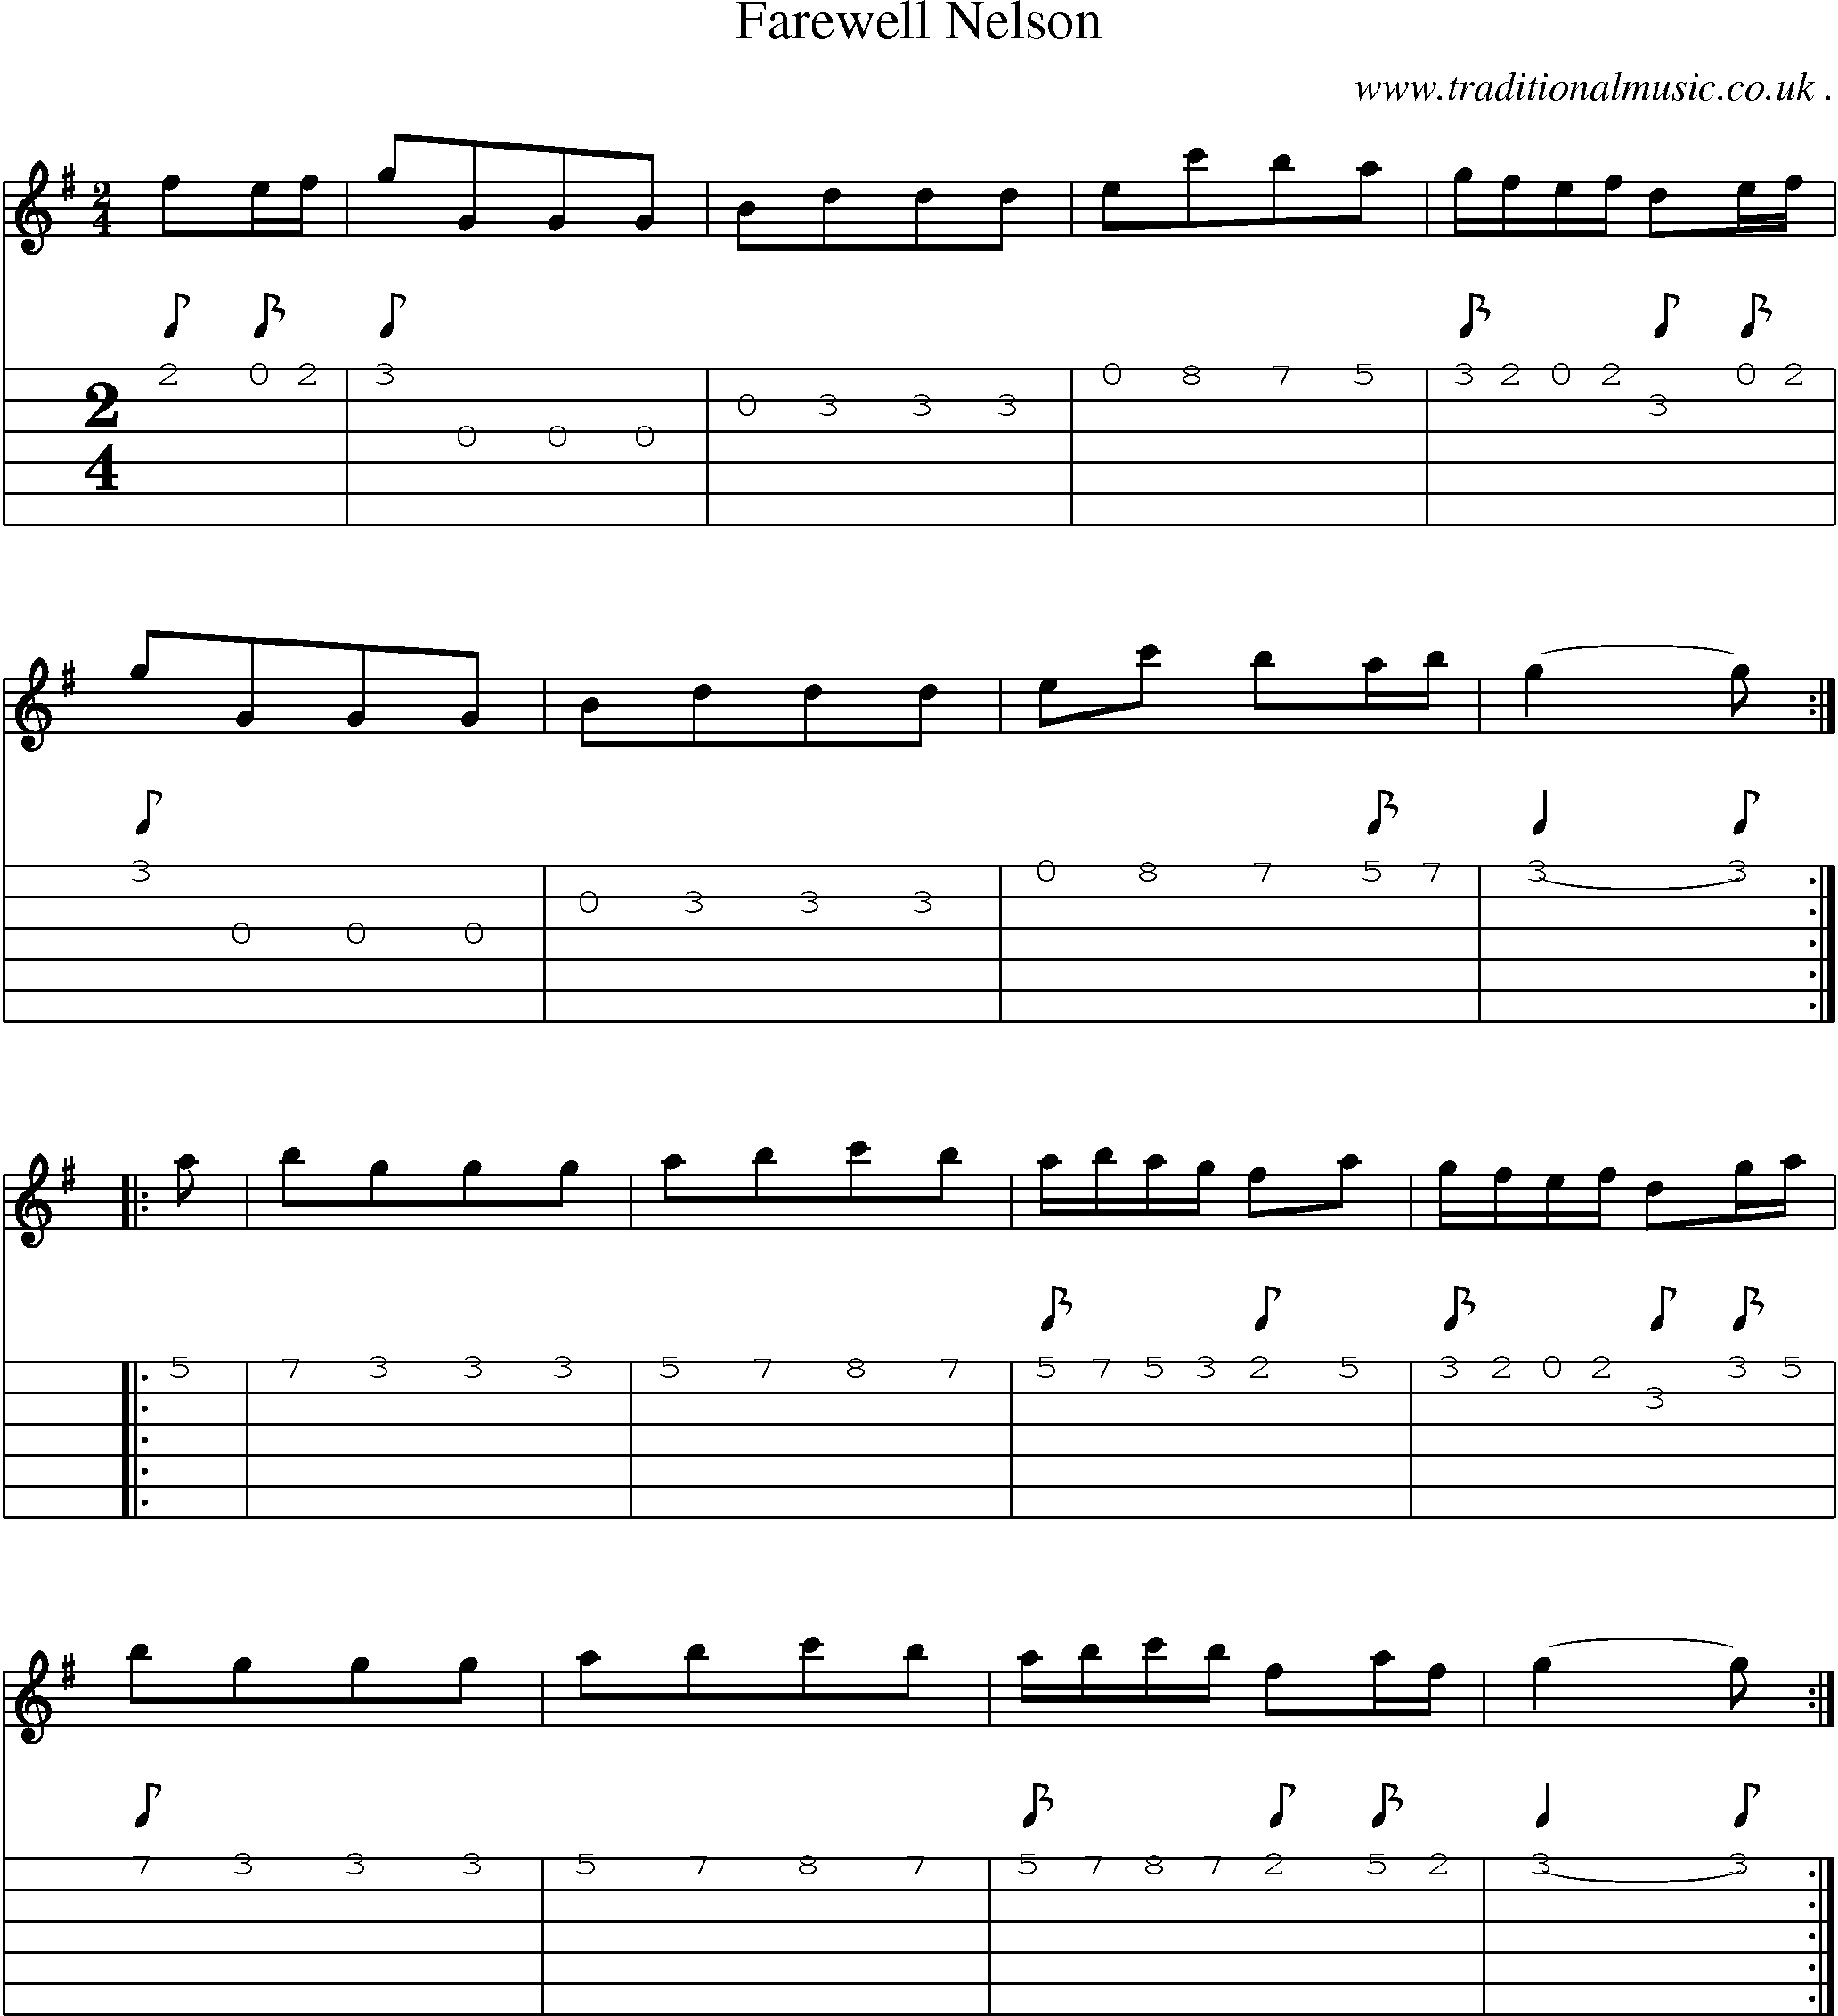 Sheet-Music and Guitar Tabs for Farewell Nelson